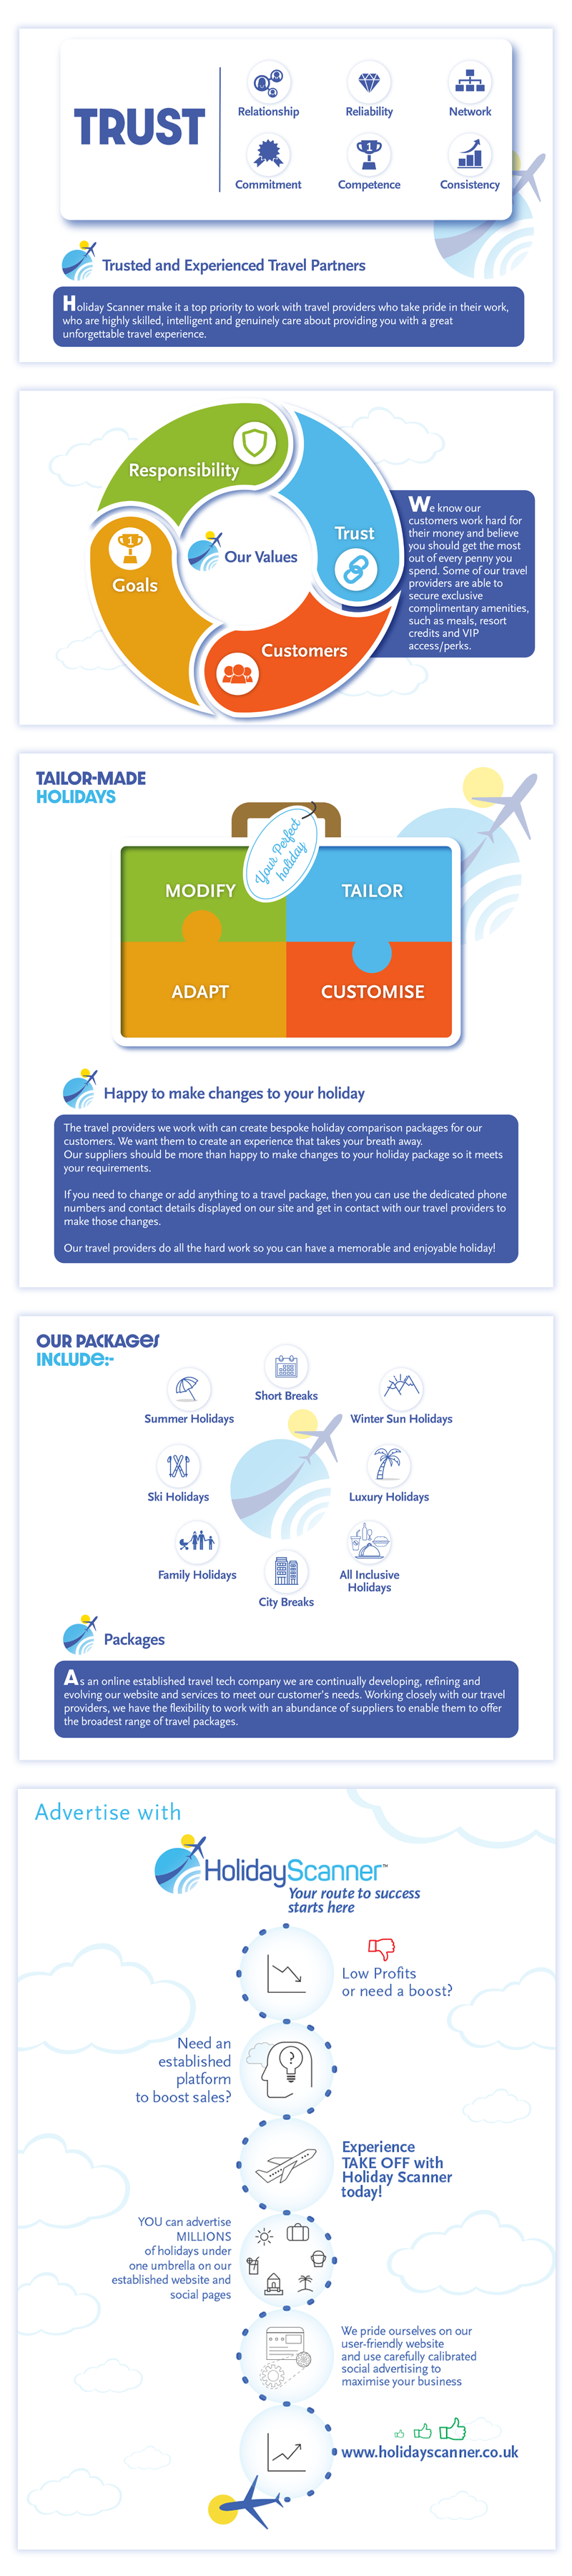 Holiday scanner infographic complete journey